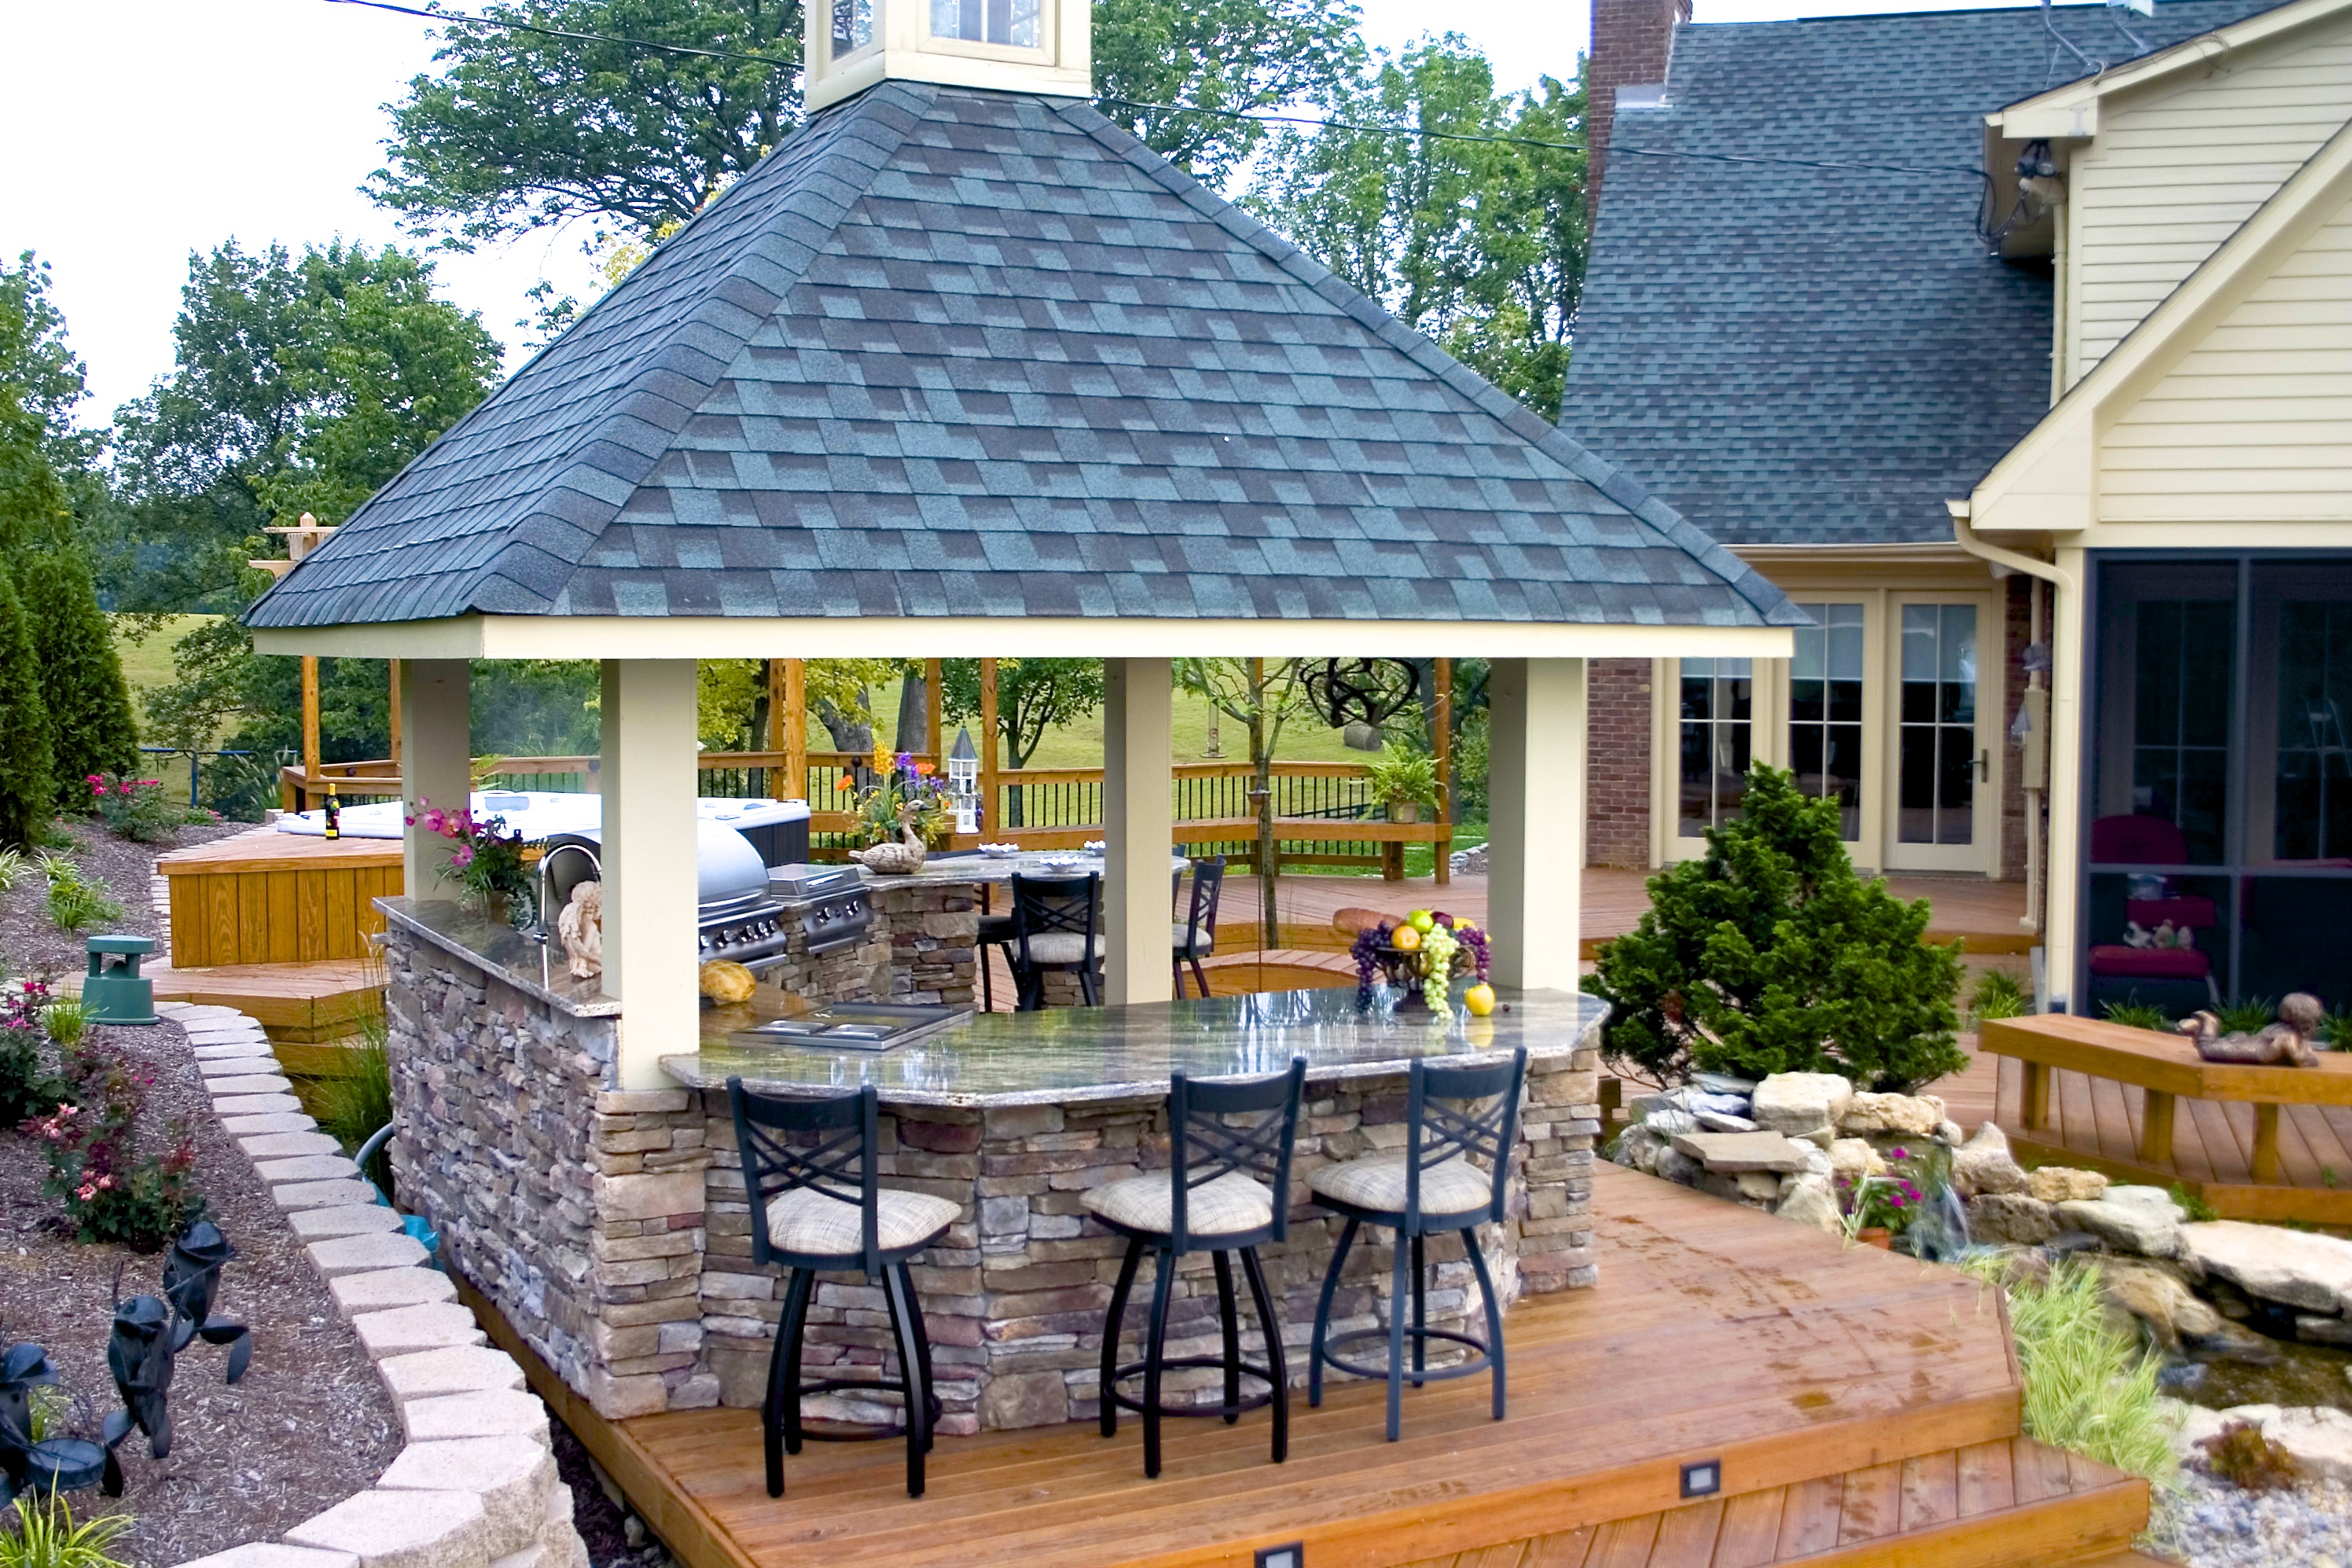 Custom Outdoor Kitchens by American Deck & Sunroom